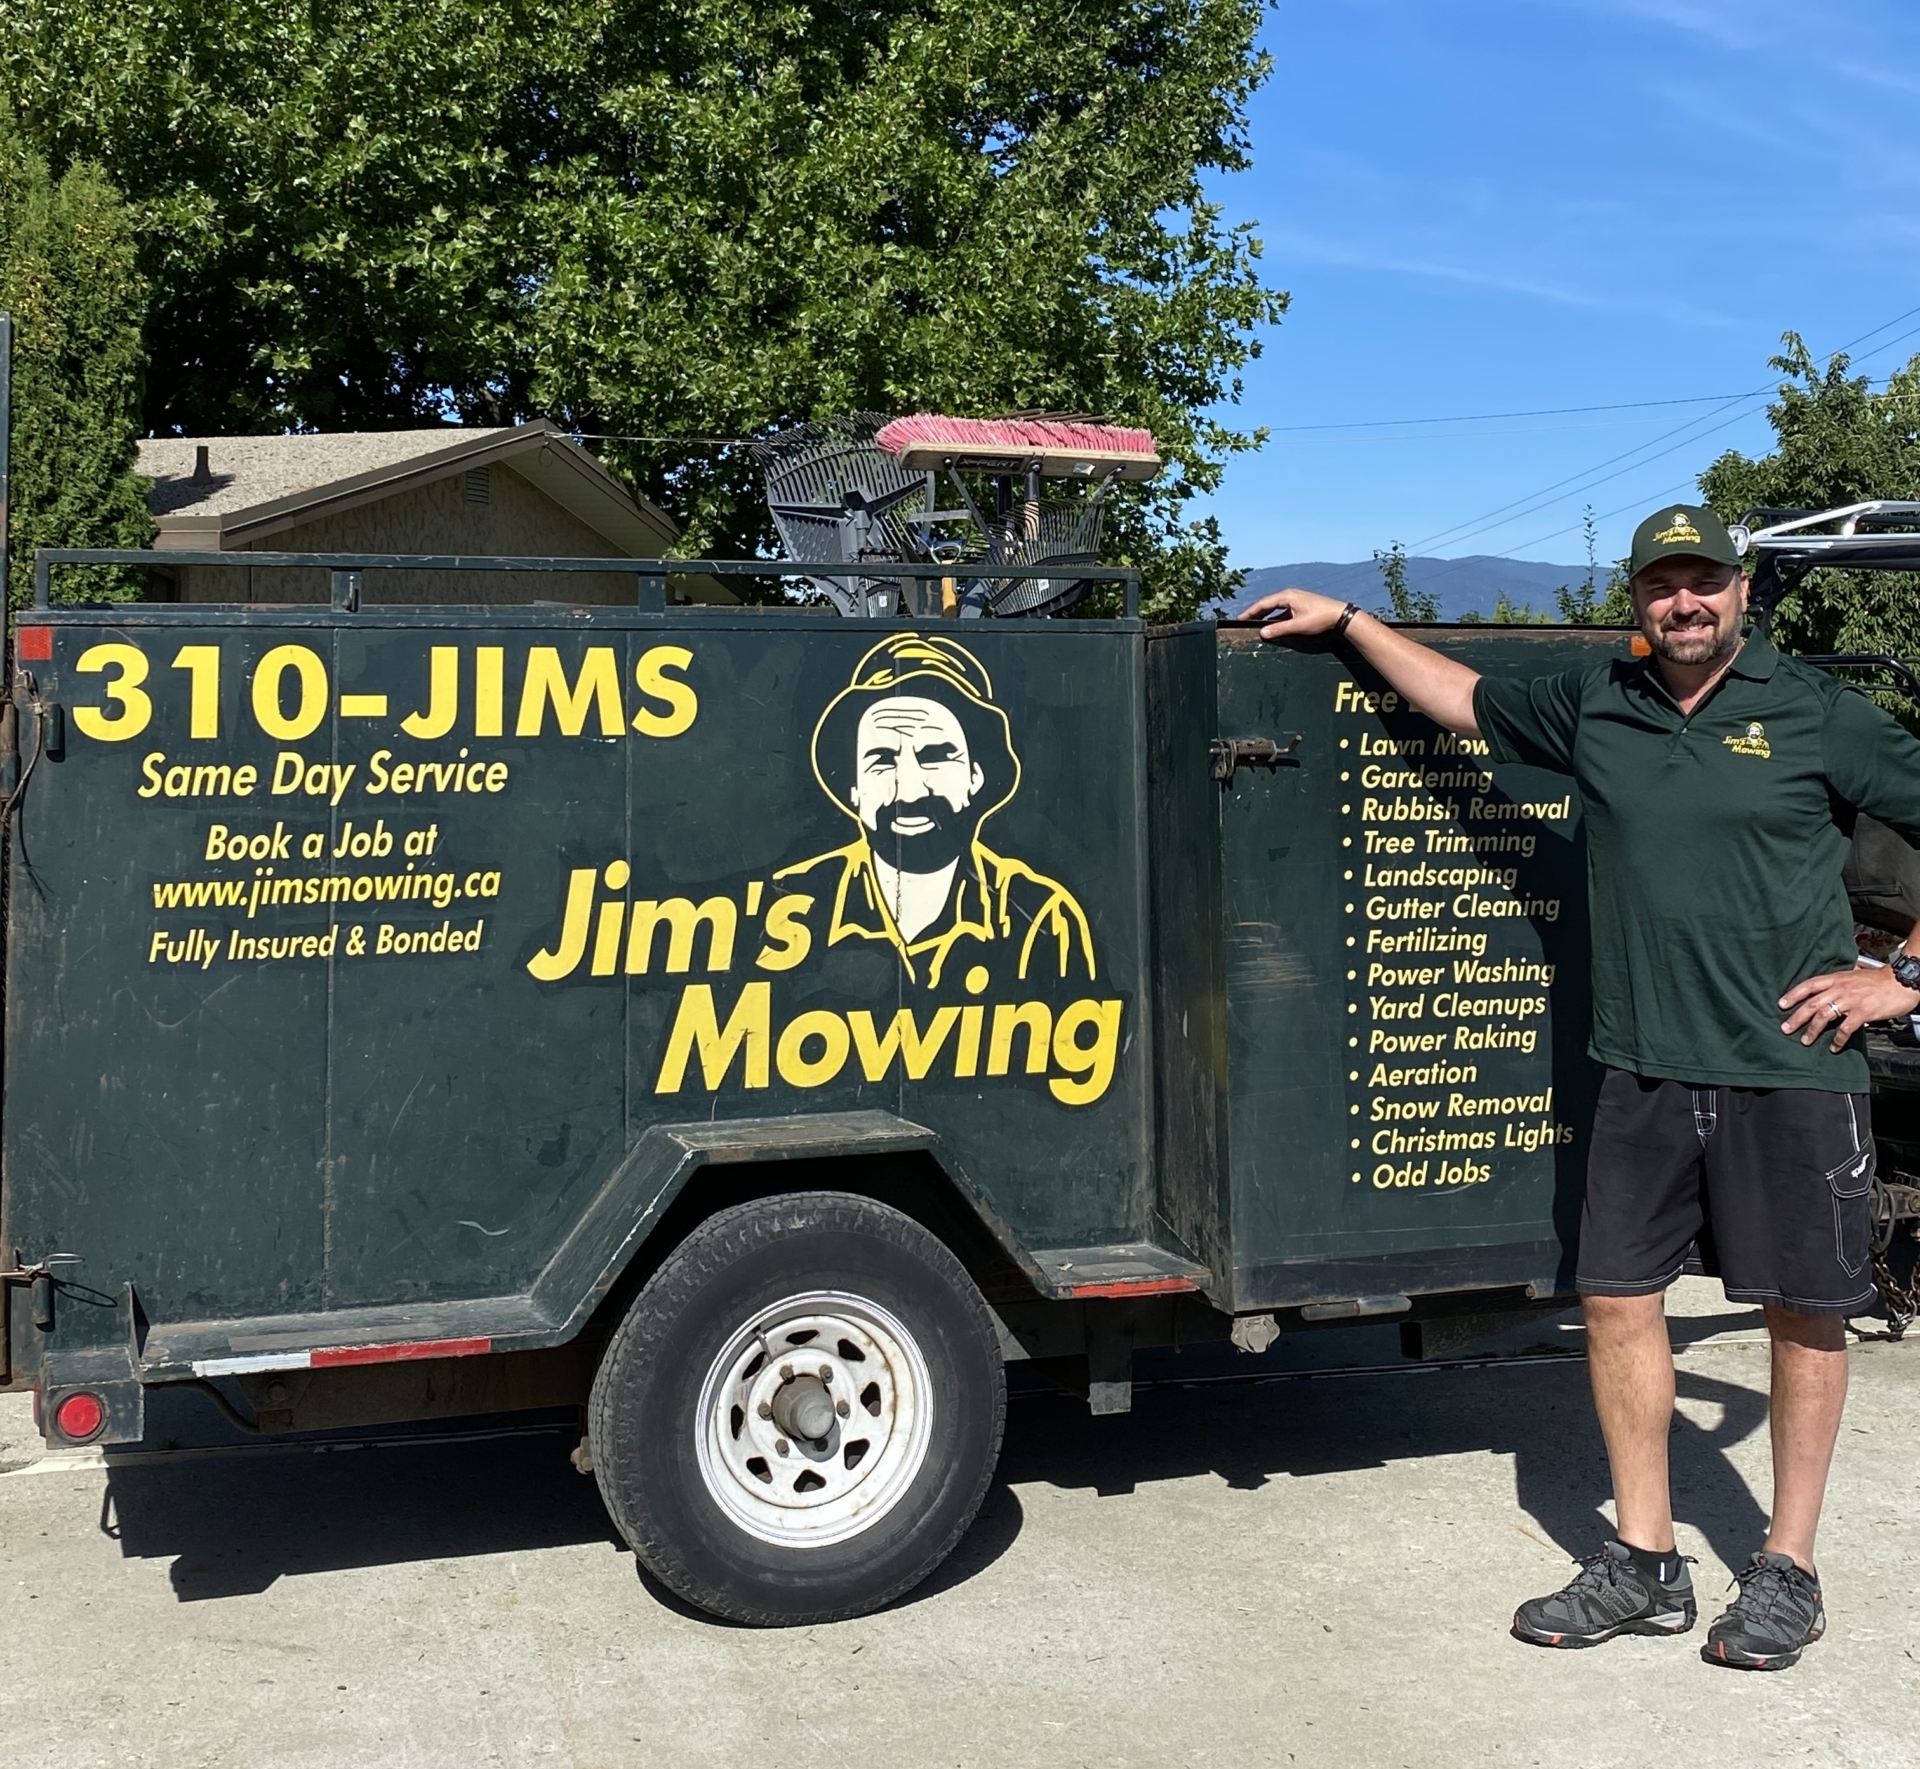 Jim’s Mowing Lawn Franchises in British Columbia